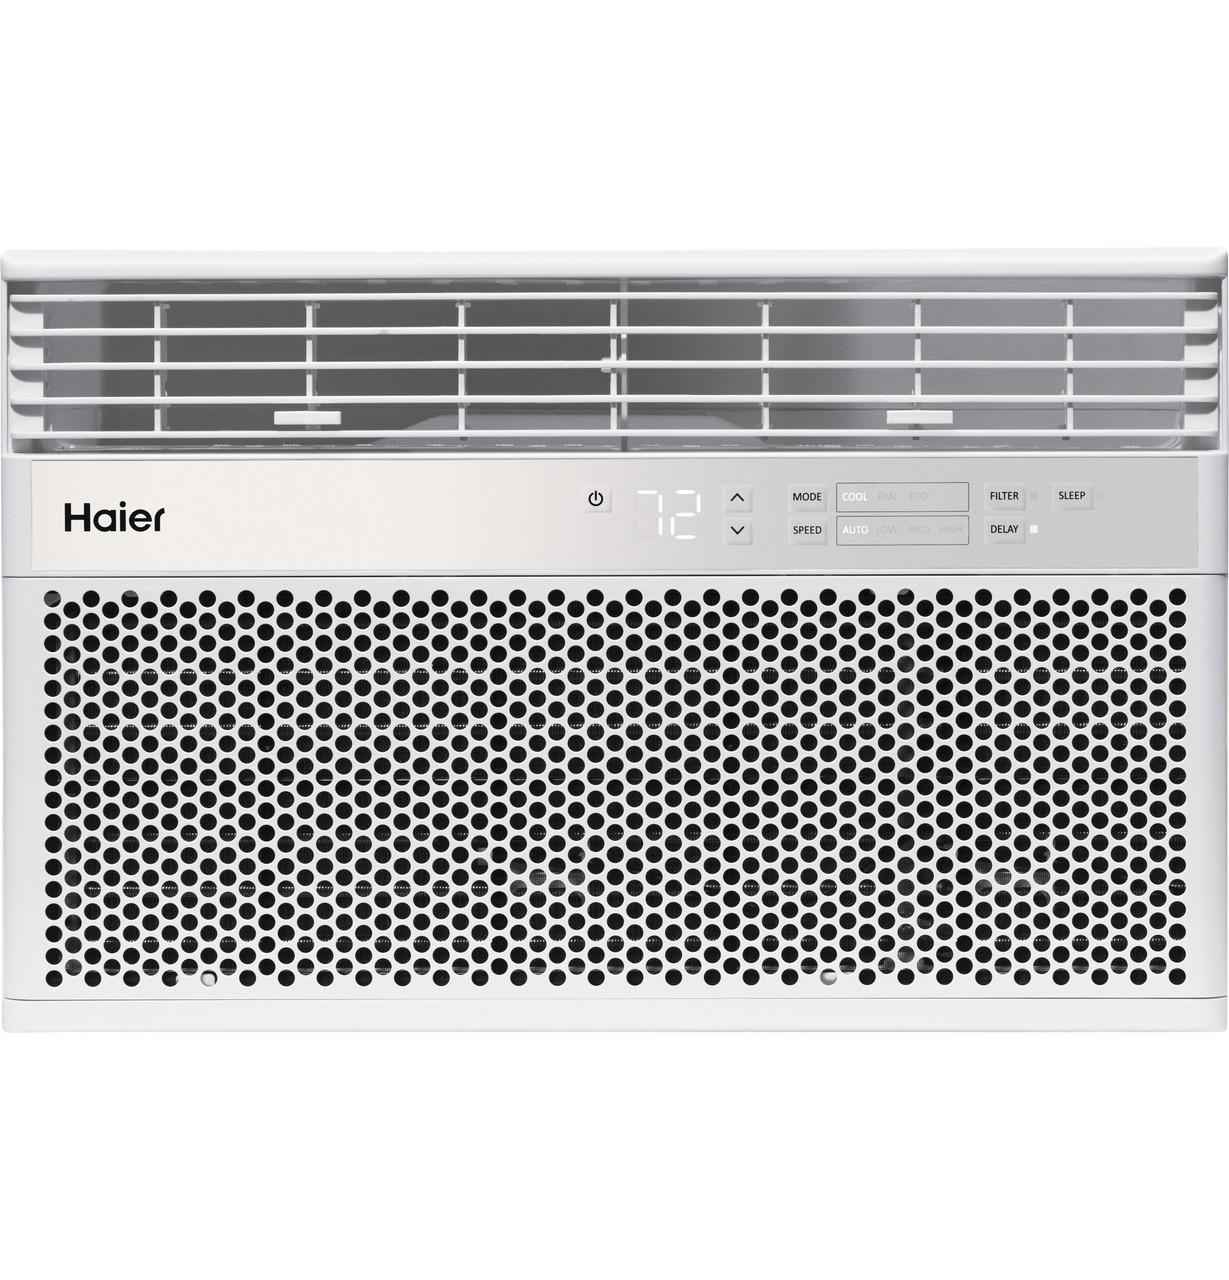 Haier ENERGY STAR® 5,000 BTU Mechanical Window Air Conditioner for Small Rooms up to 150 sq ft.